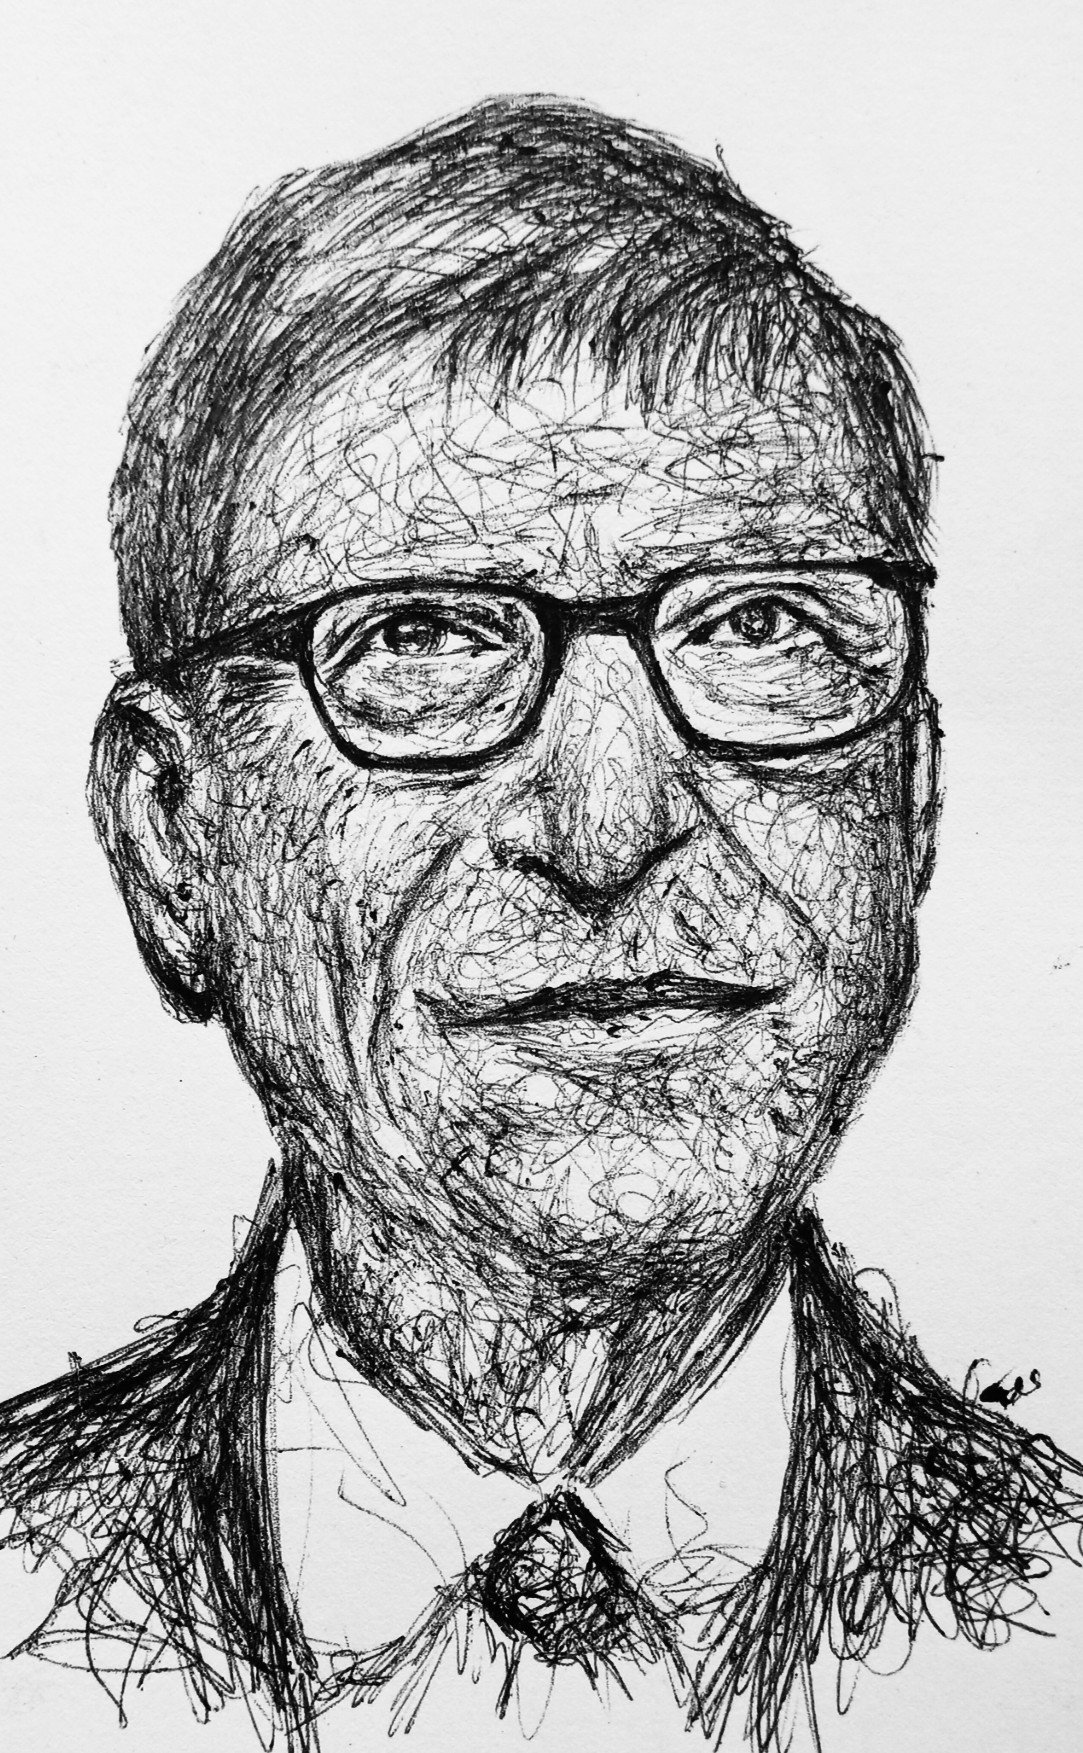 Bill Gates Canvas painting Prints Character Sketch Poster Wall Art For Home  Office room Decorations Unframed